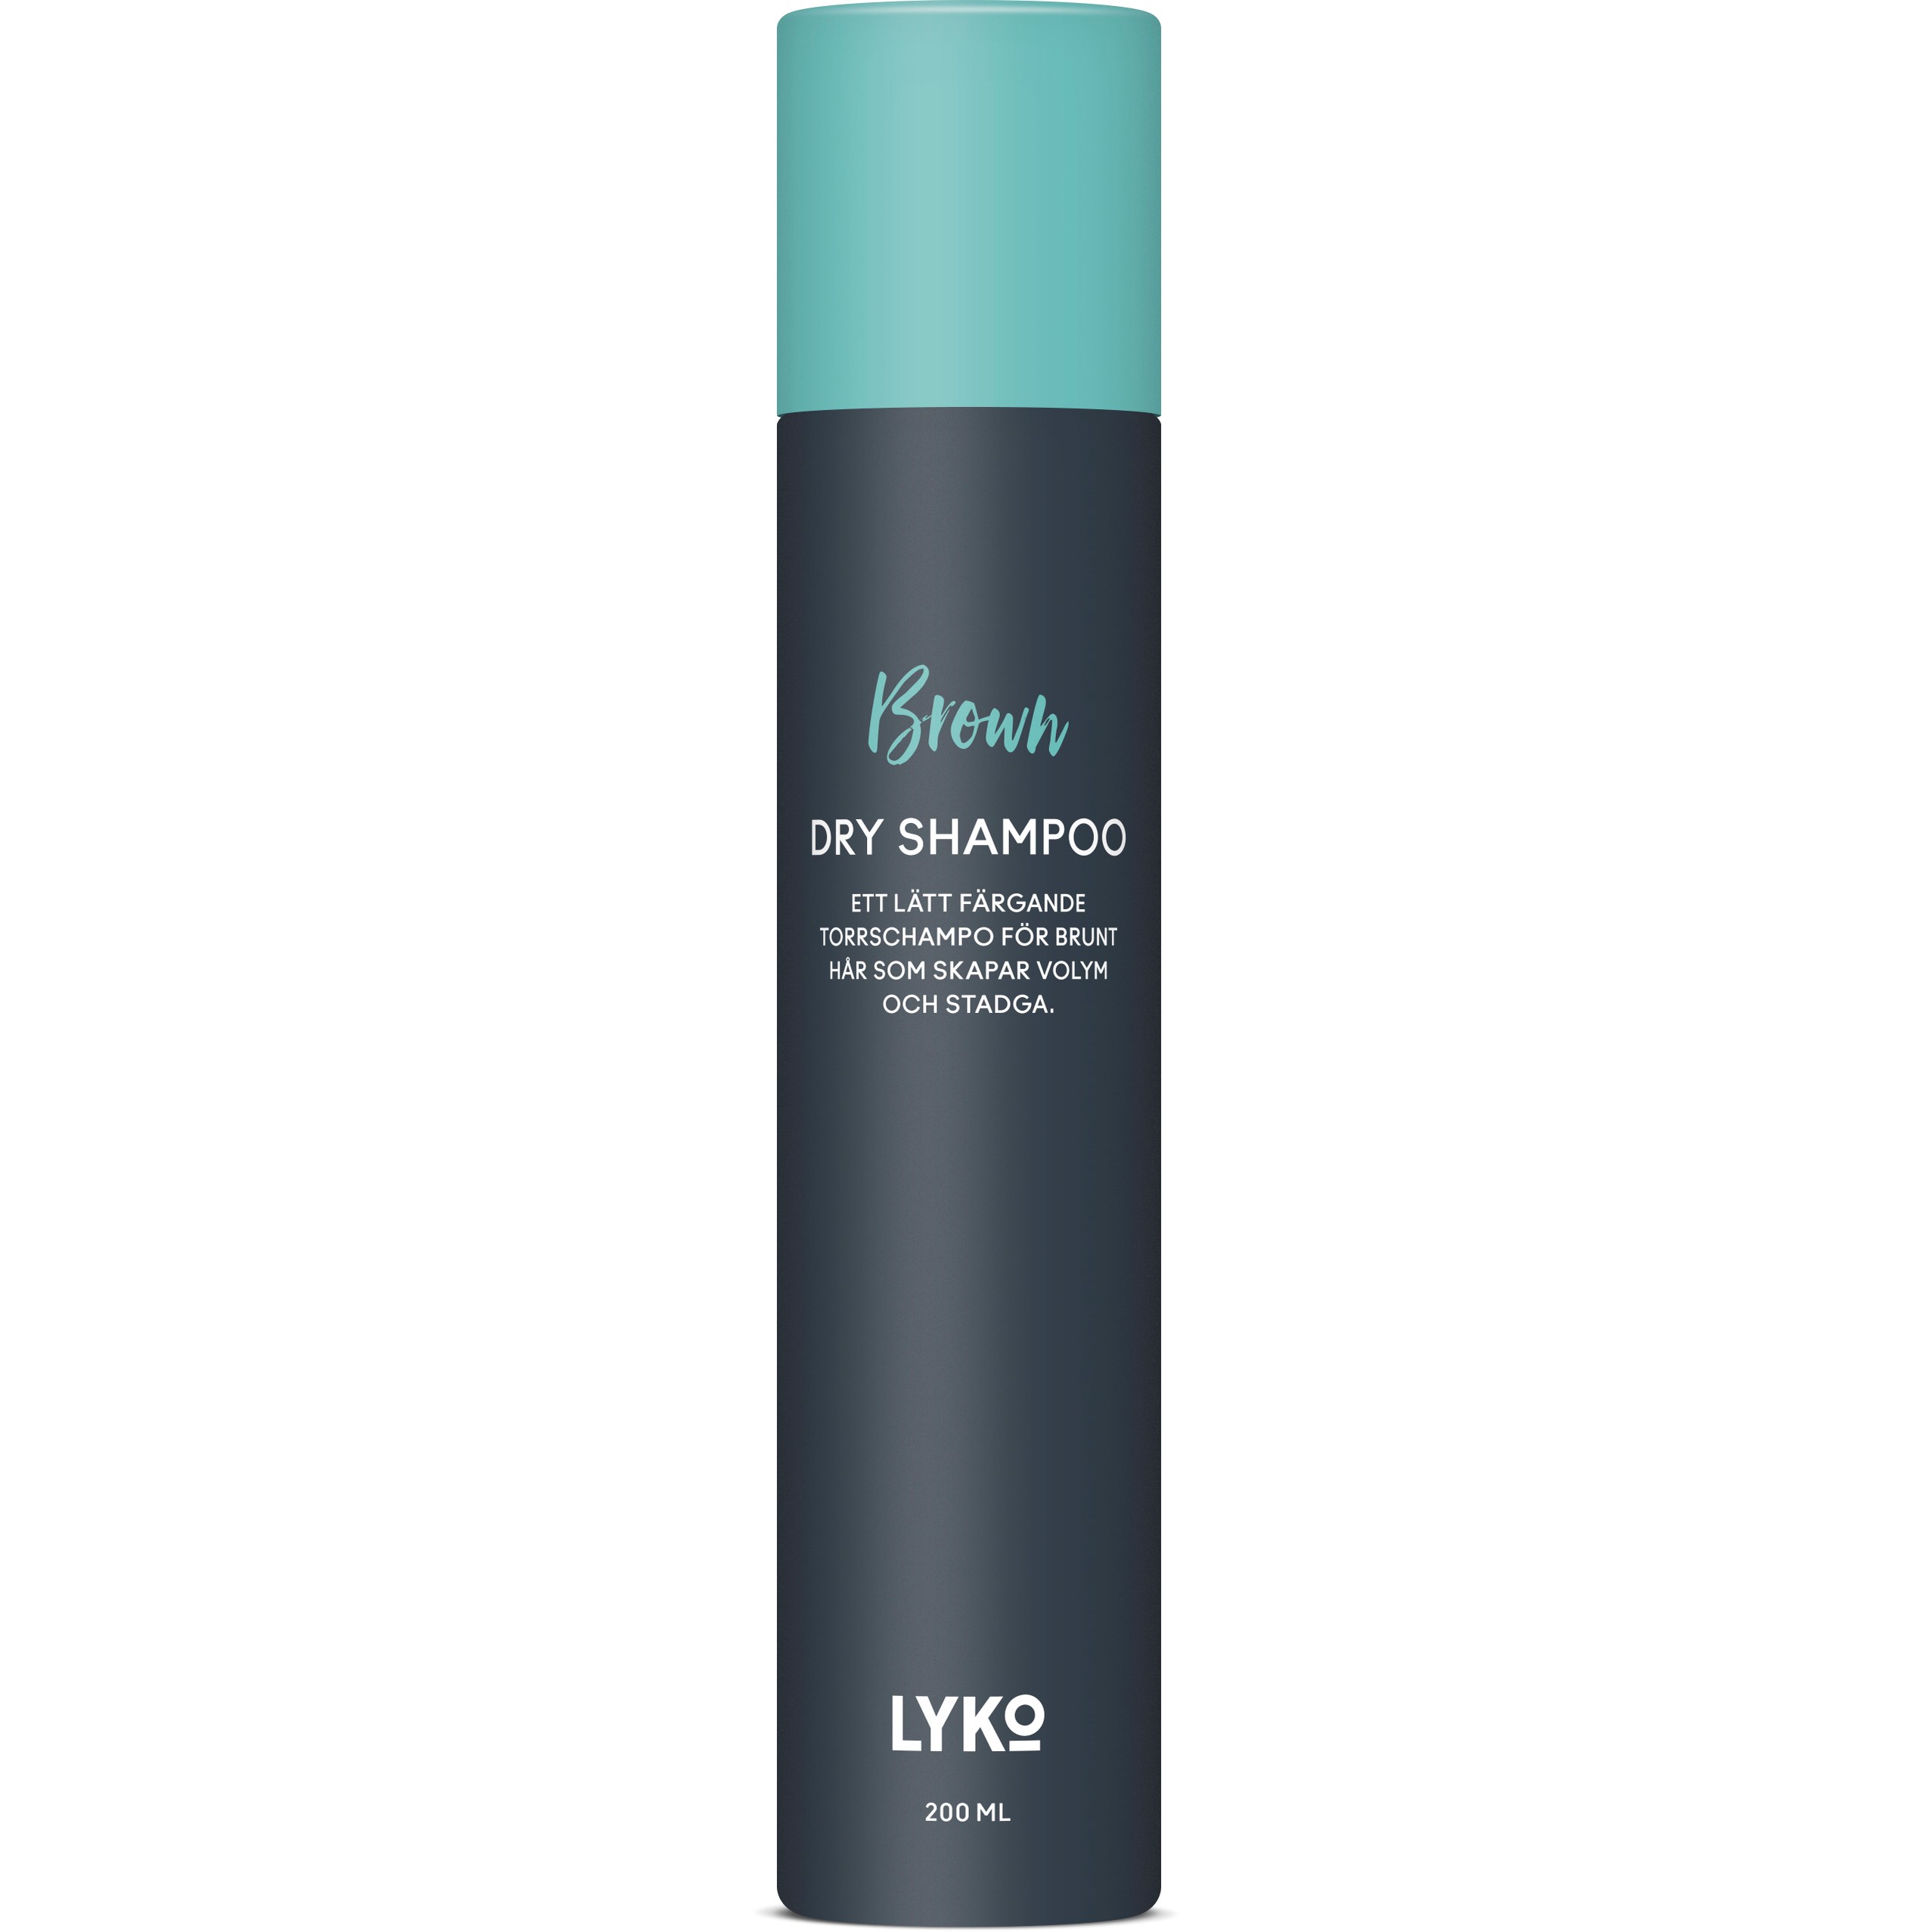 By Lyko Dry Shampoo Brown